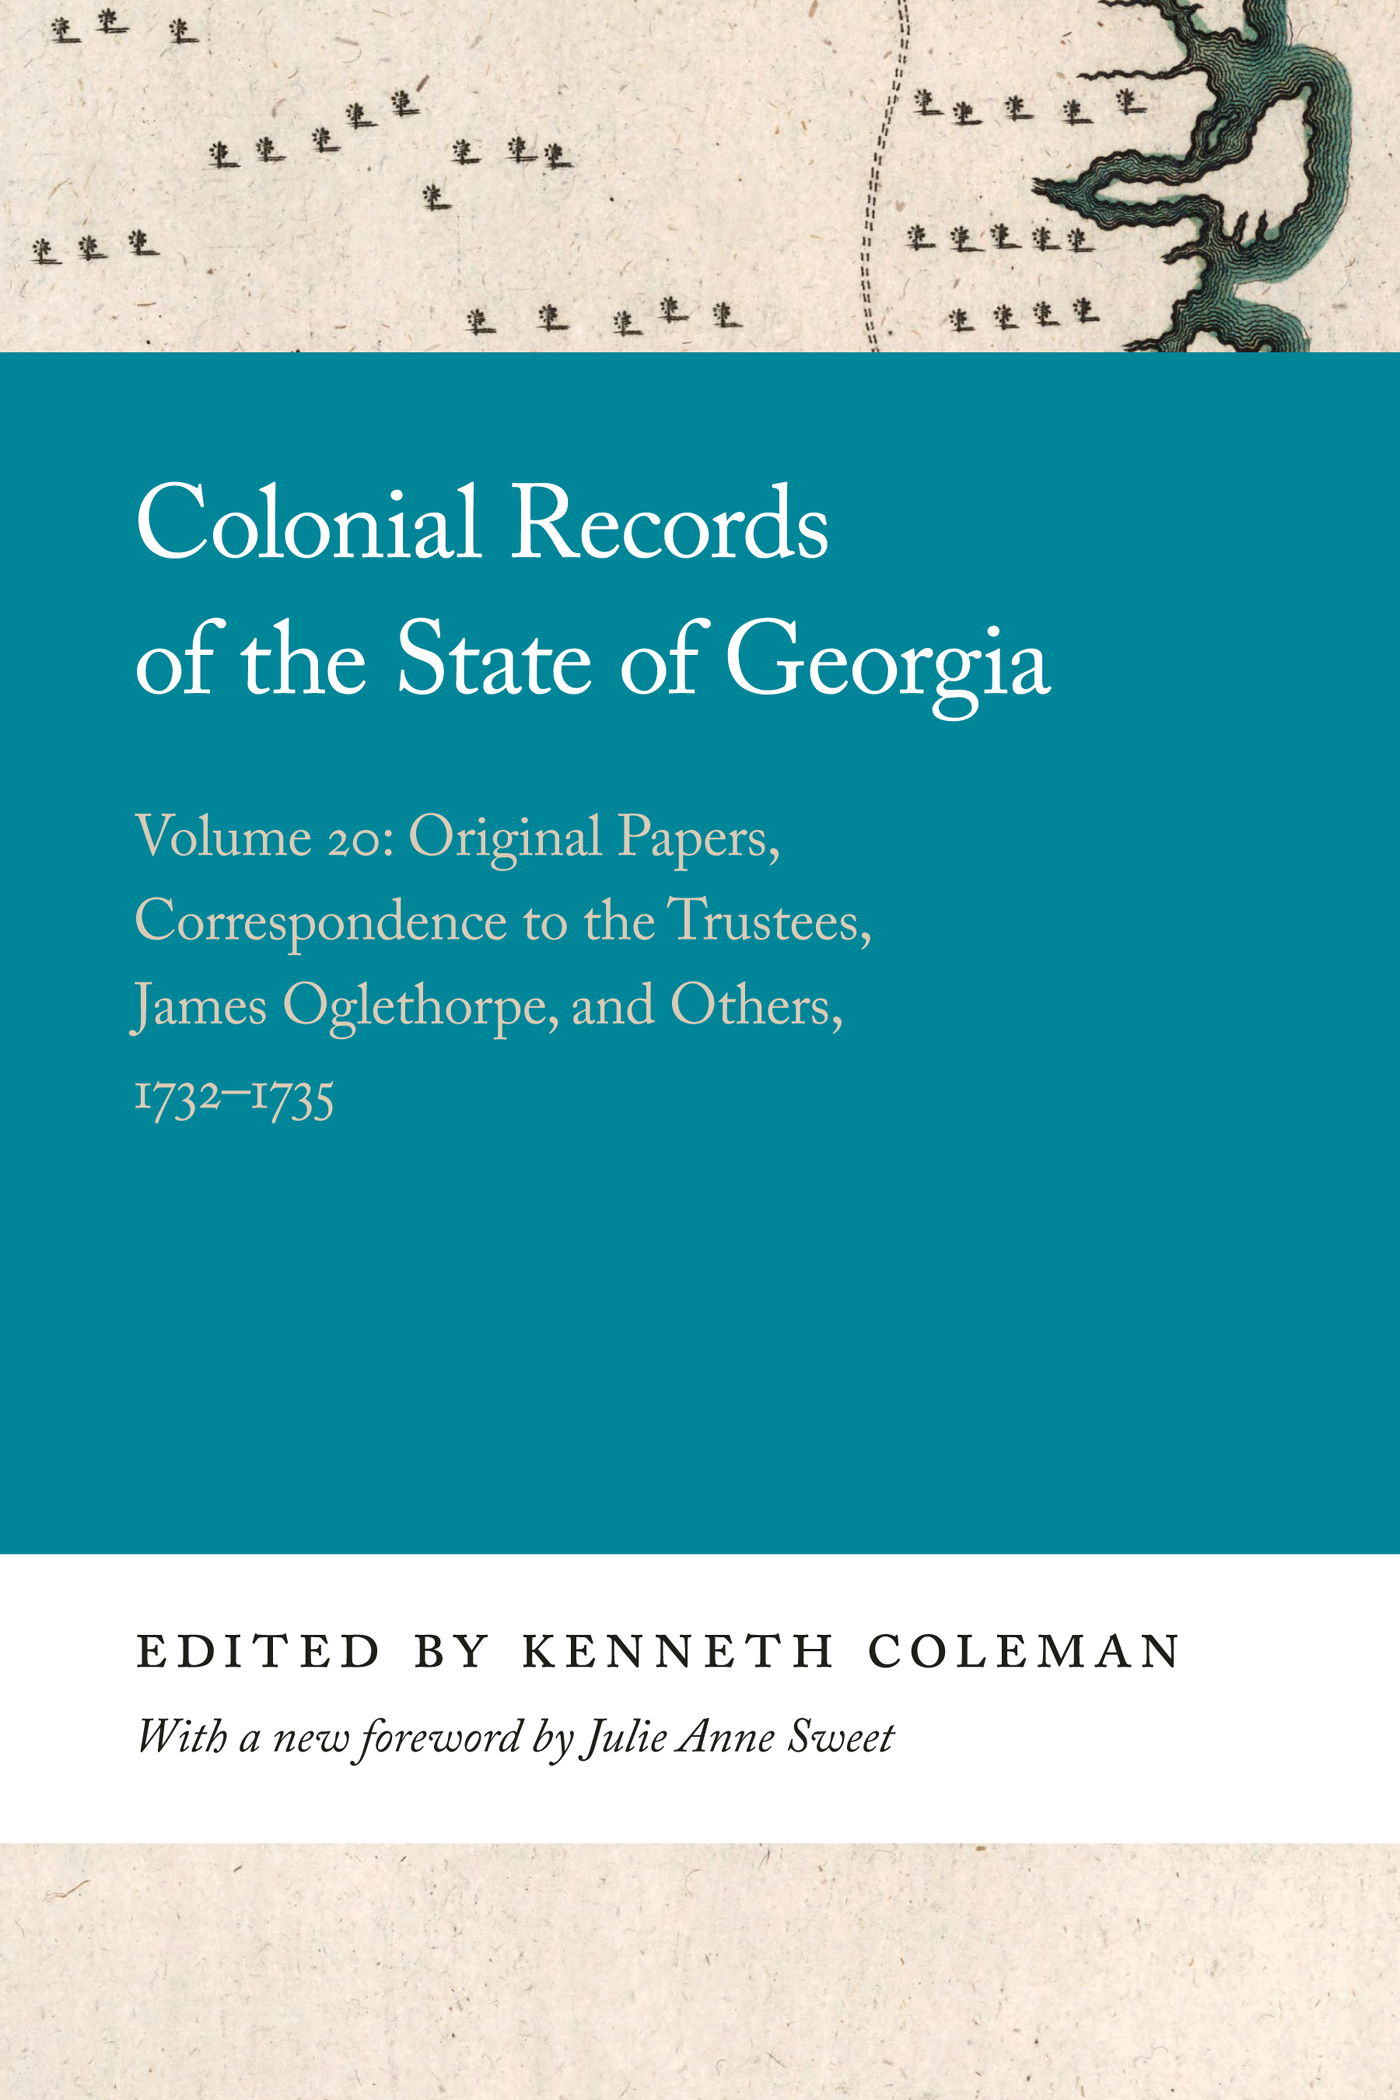 Cover page of the book “Colonial Records of the State of Georgia.”